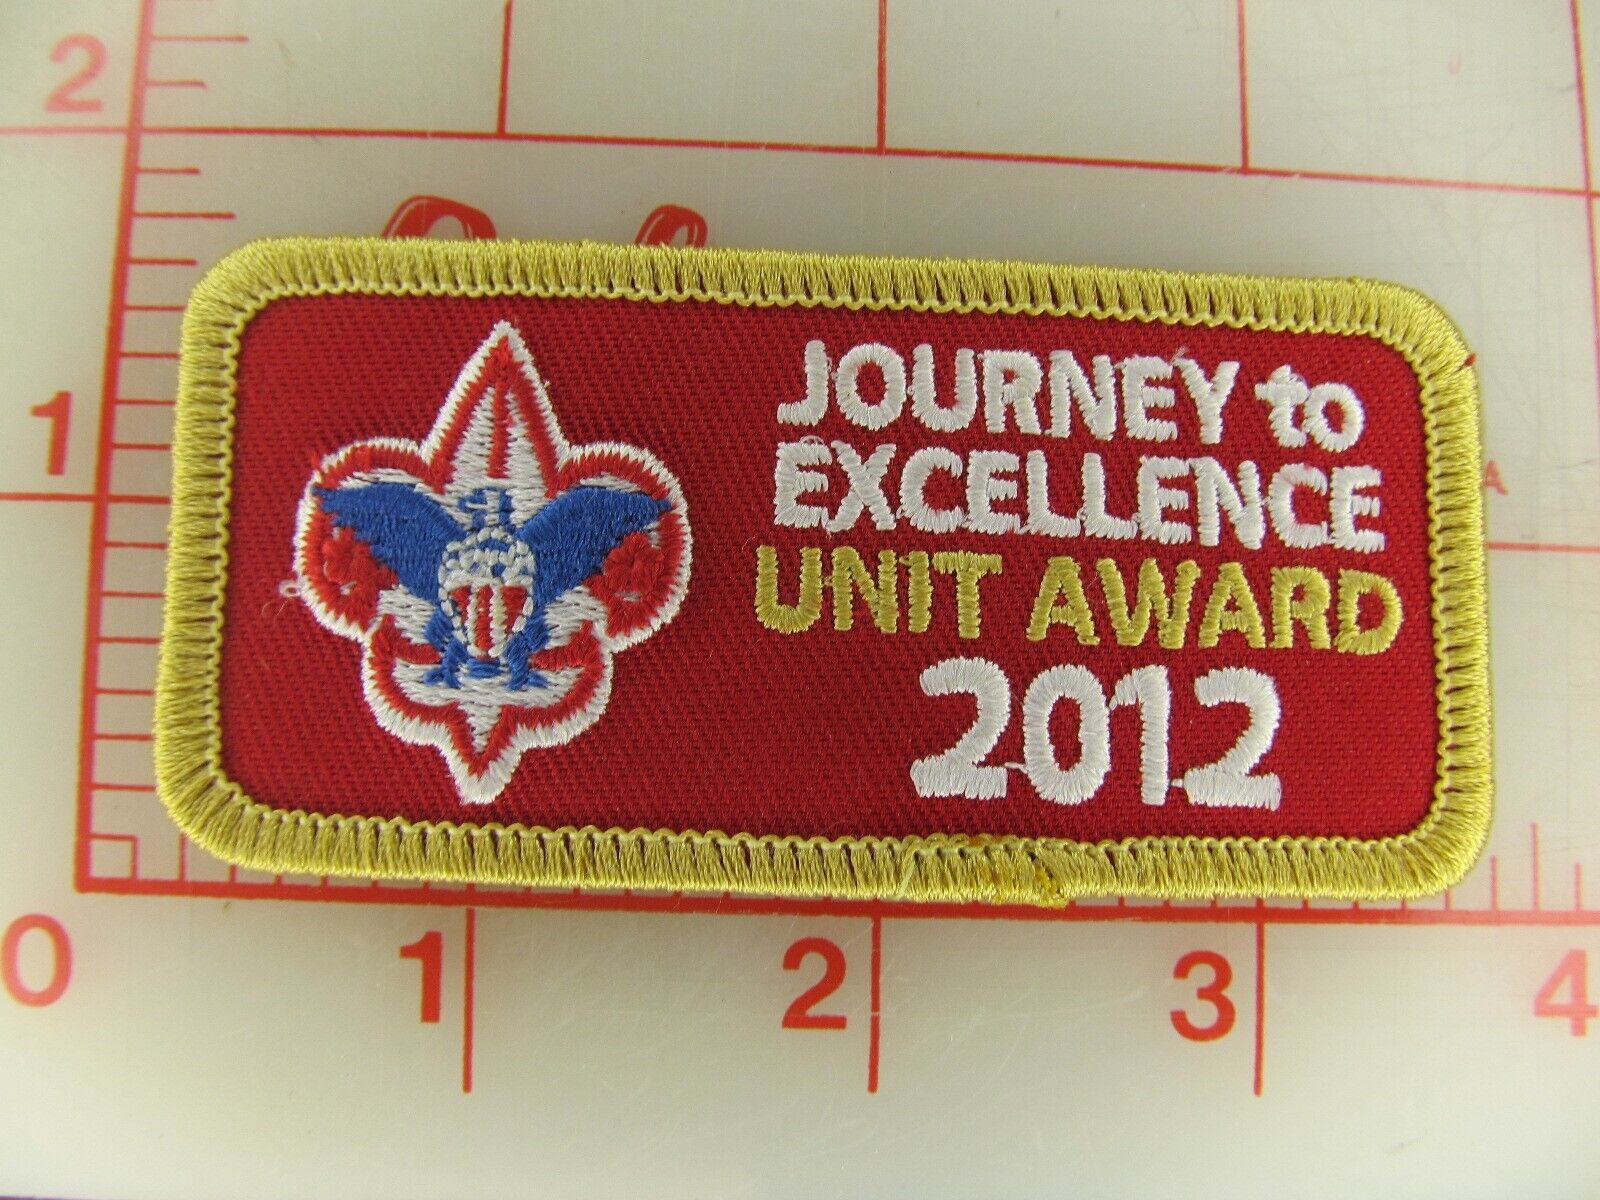 2012 Journey to Excellence Unit GOLD Award collectible patch (m10)